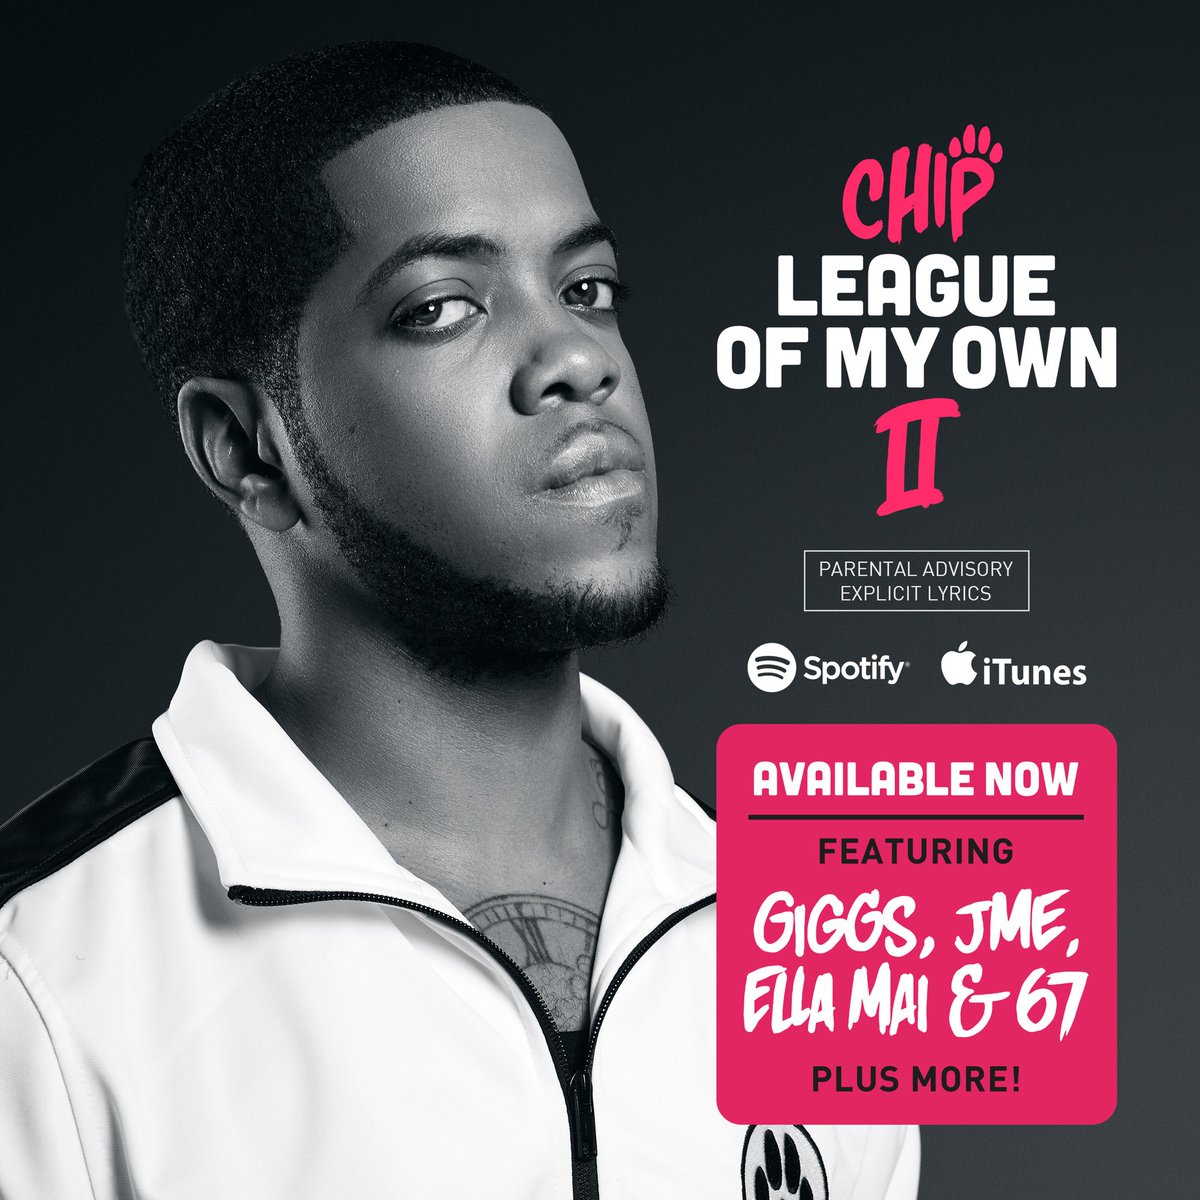 It's League of my Own II day! @OfficialChip's new album is available now. Art by me and @AshleyVerse #LOMO2